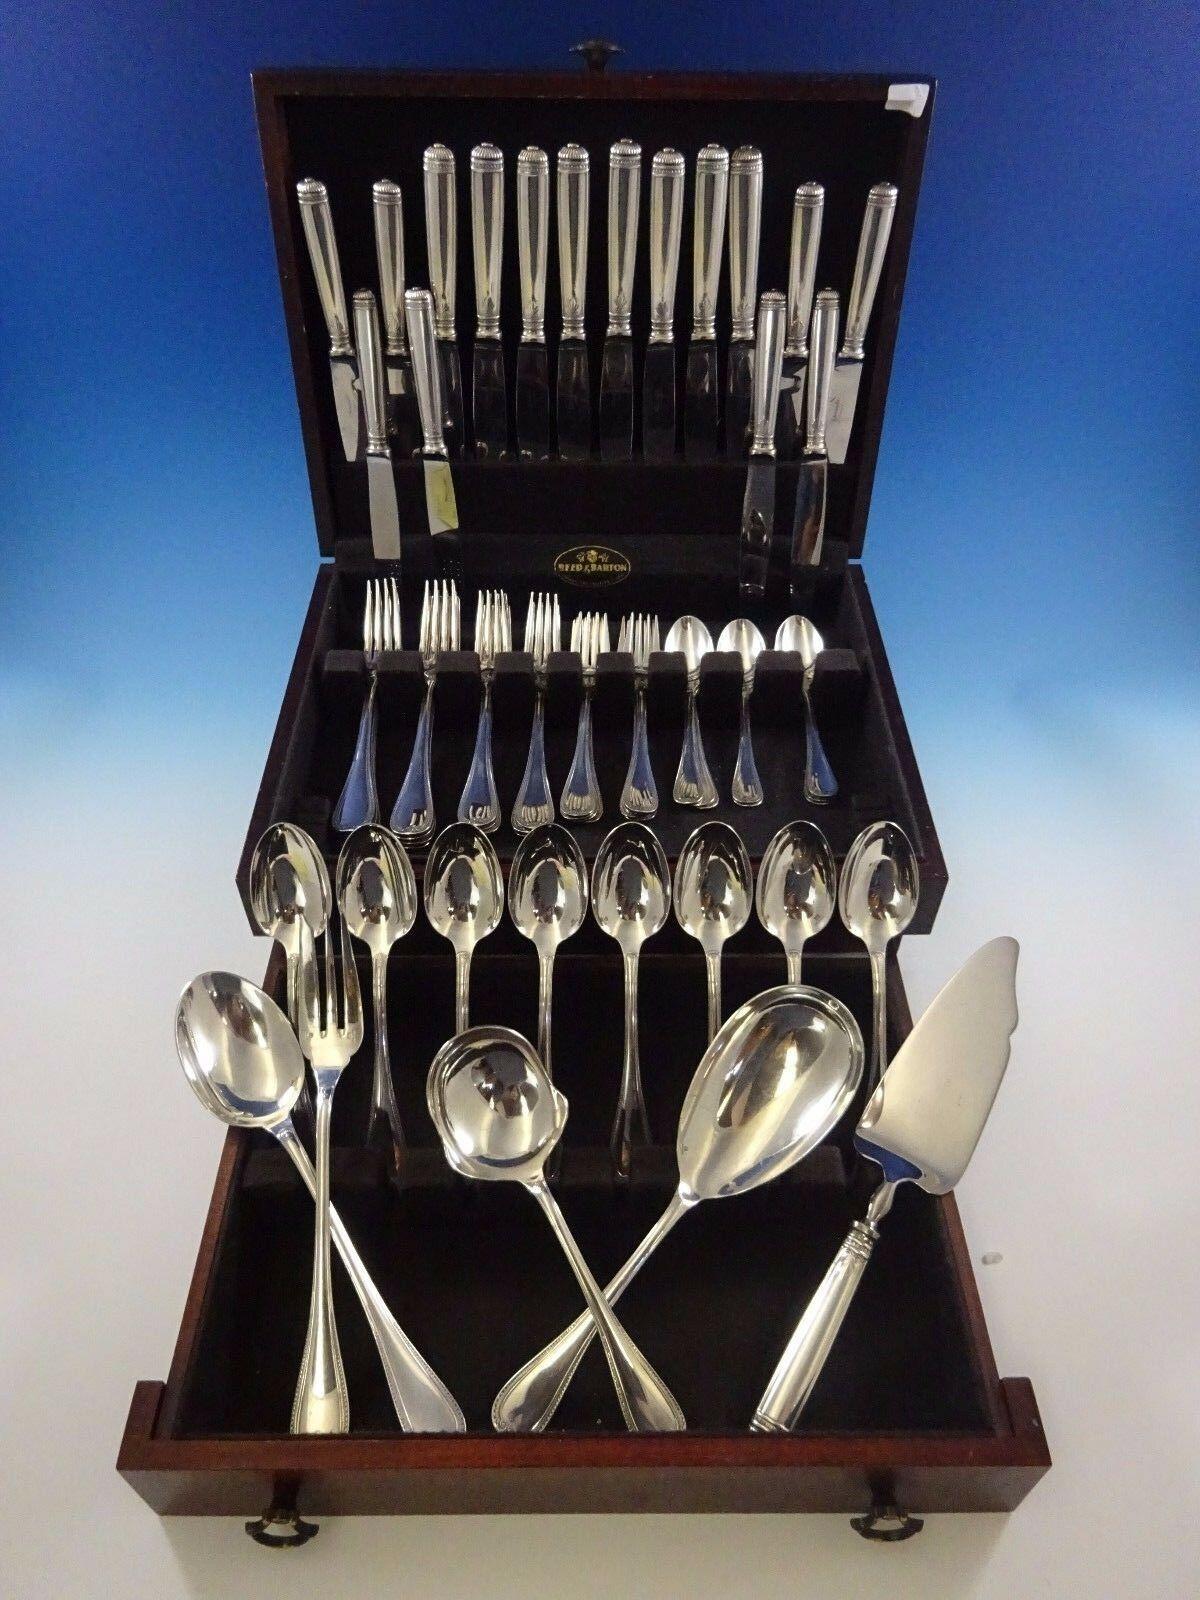 Malmaison by Christofle silver plate flatware set-61 pieces. This set includes:

8 dinner knives, 10